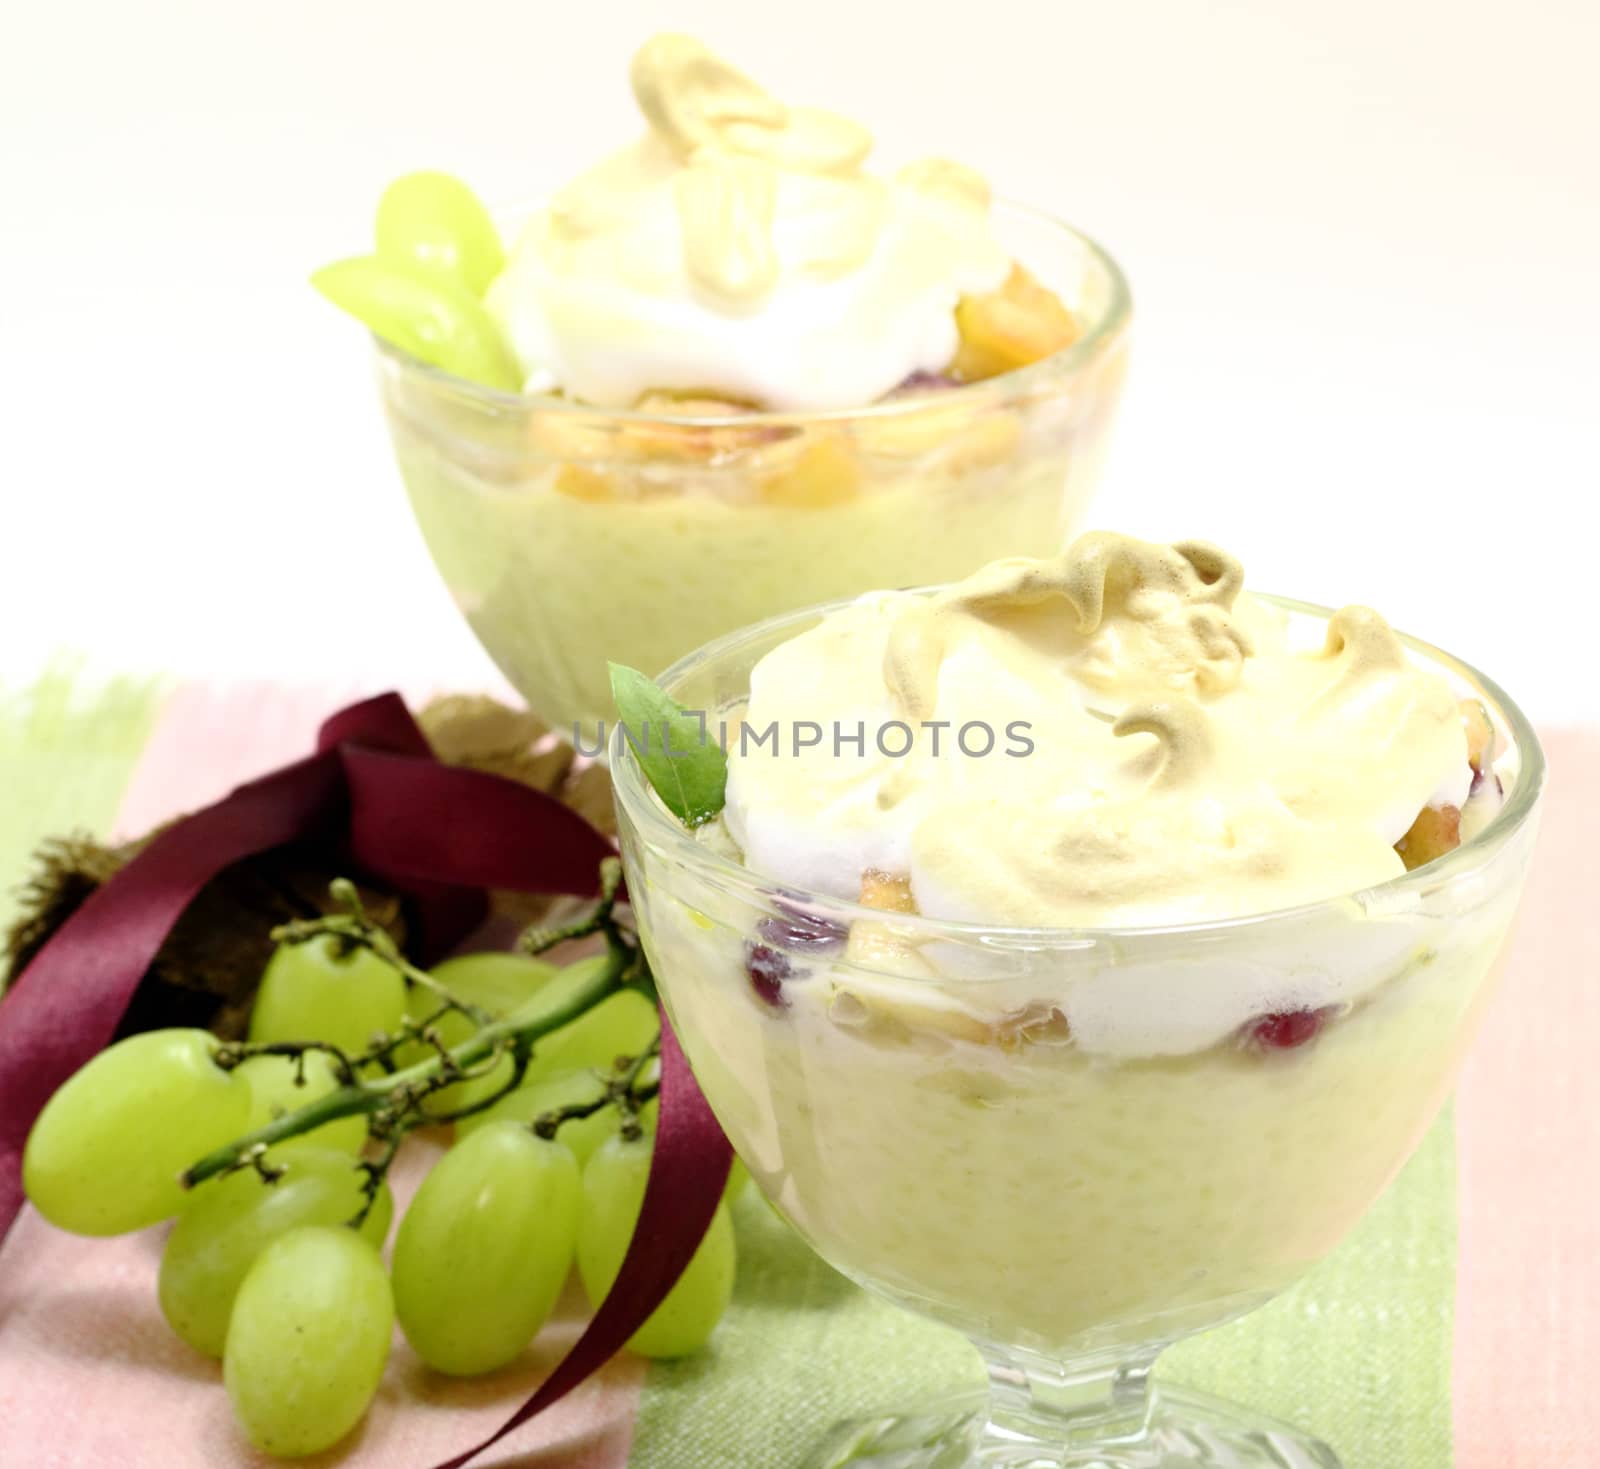 Rice pudding with apples cranberries and grapes 